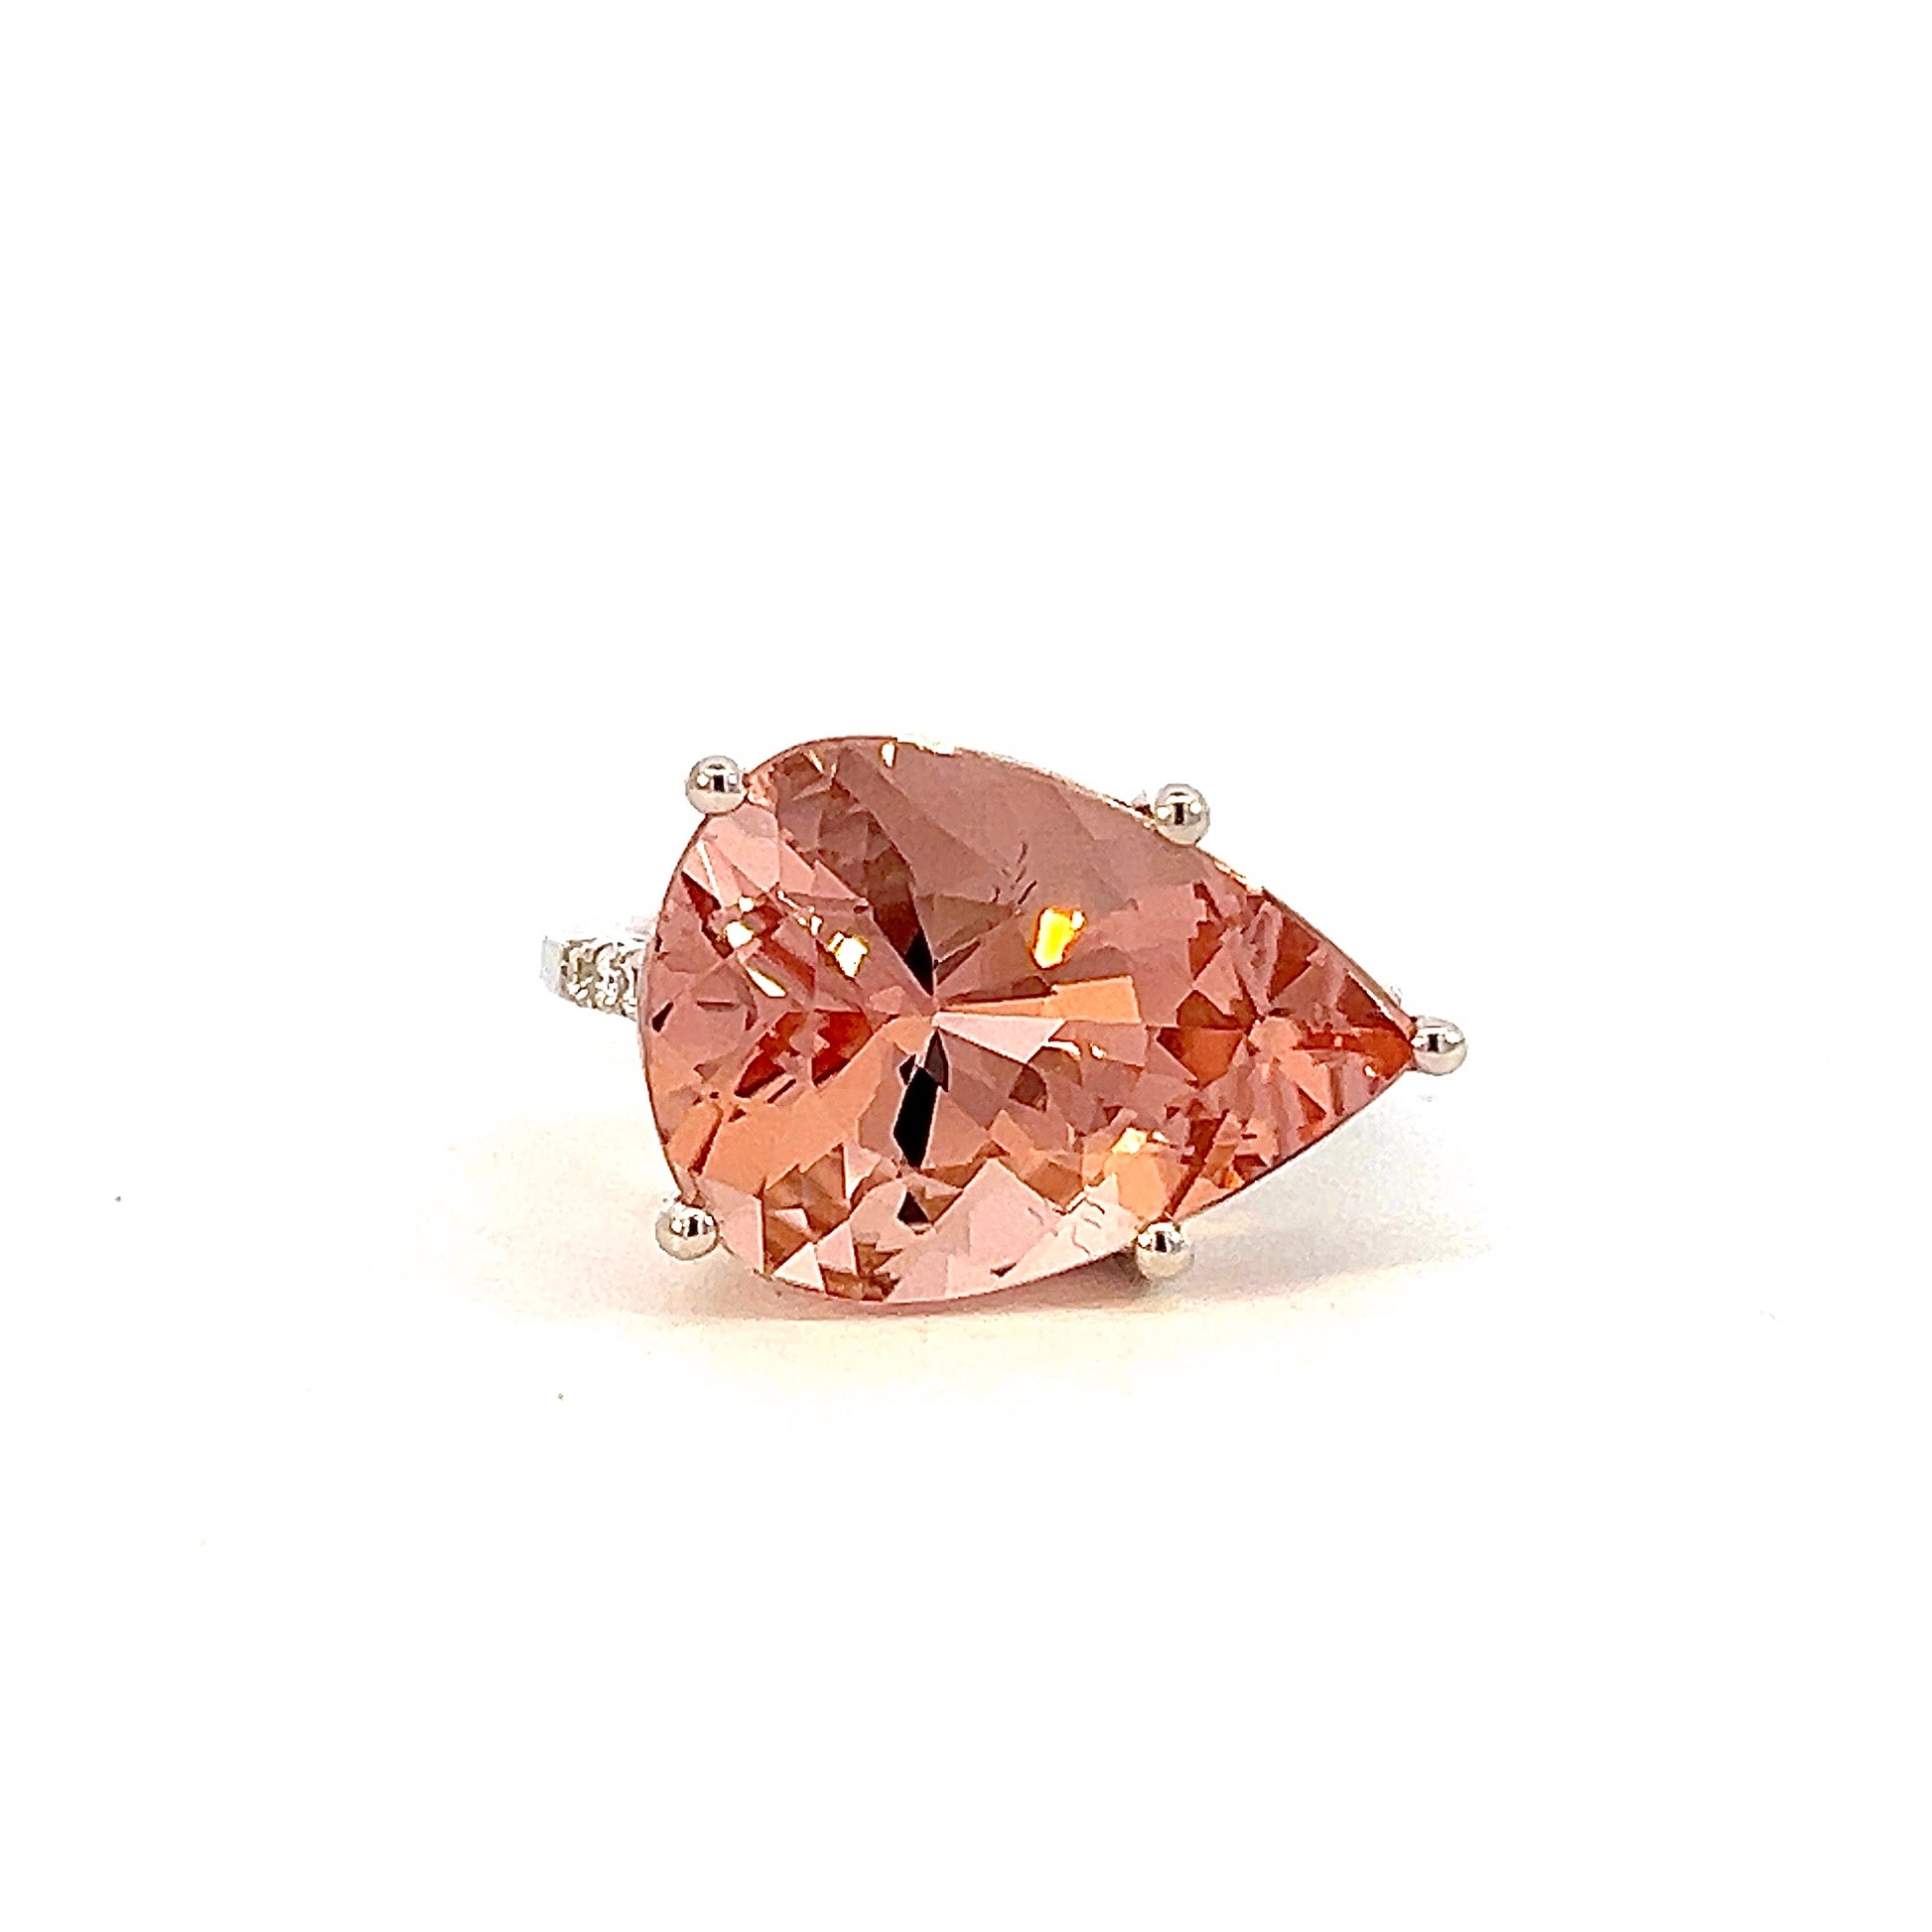 Natural Morganite Diamond Ring 6.5 14k White Gold 8.99 TCW Certified $5,950 310650 - Certified Fine Jewelry